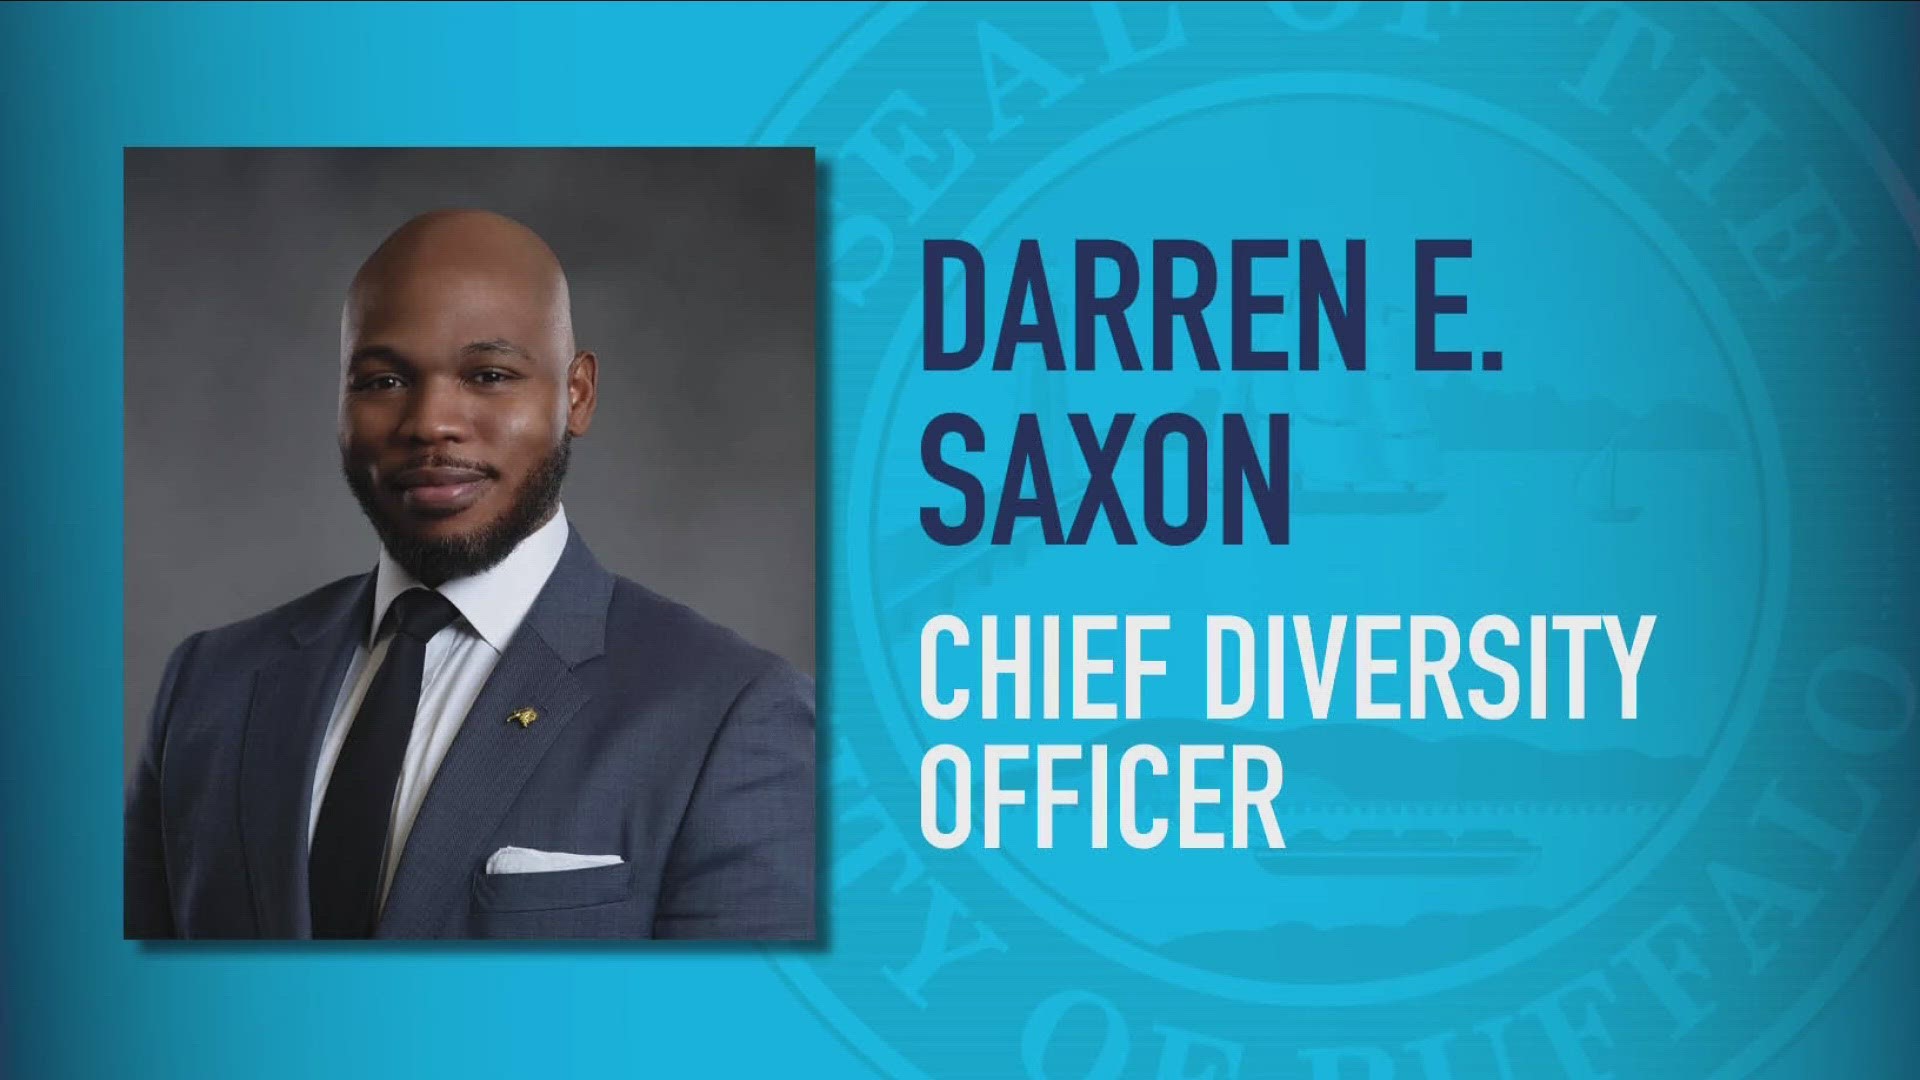 City of Buffalo Mayor Byron Brown announced the appointment of Darren Saxon as the new Chief Diversity Officer for diversity, equity, and inclusion.